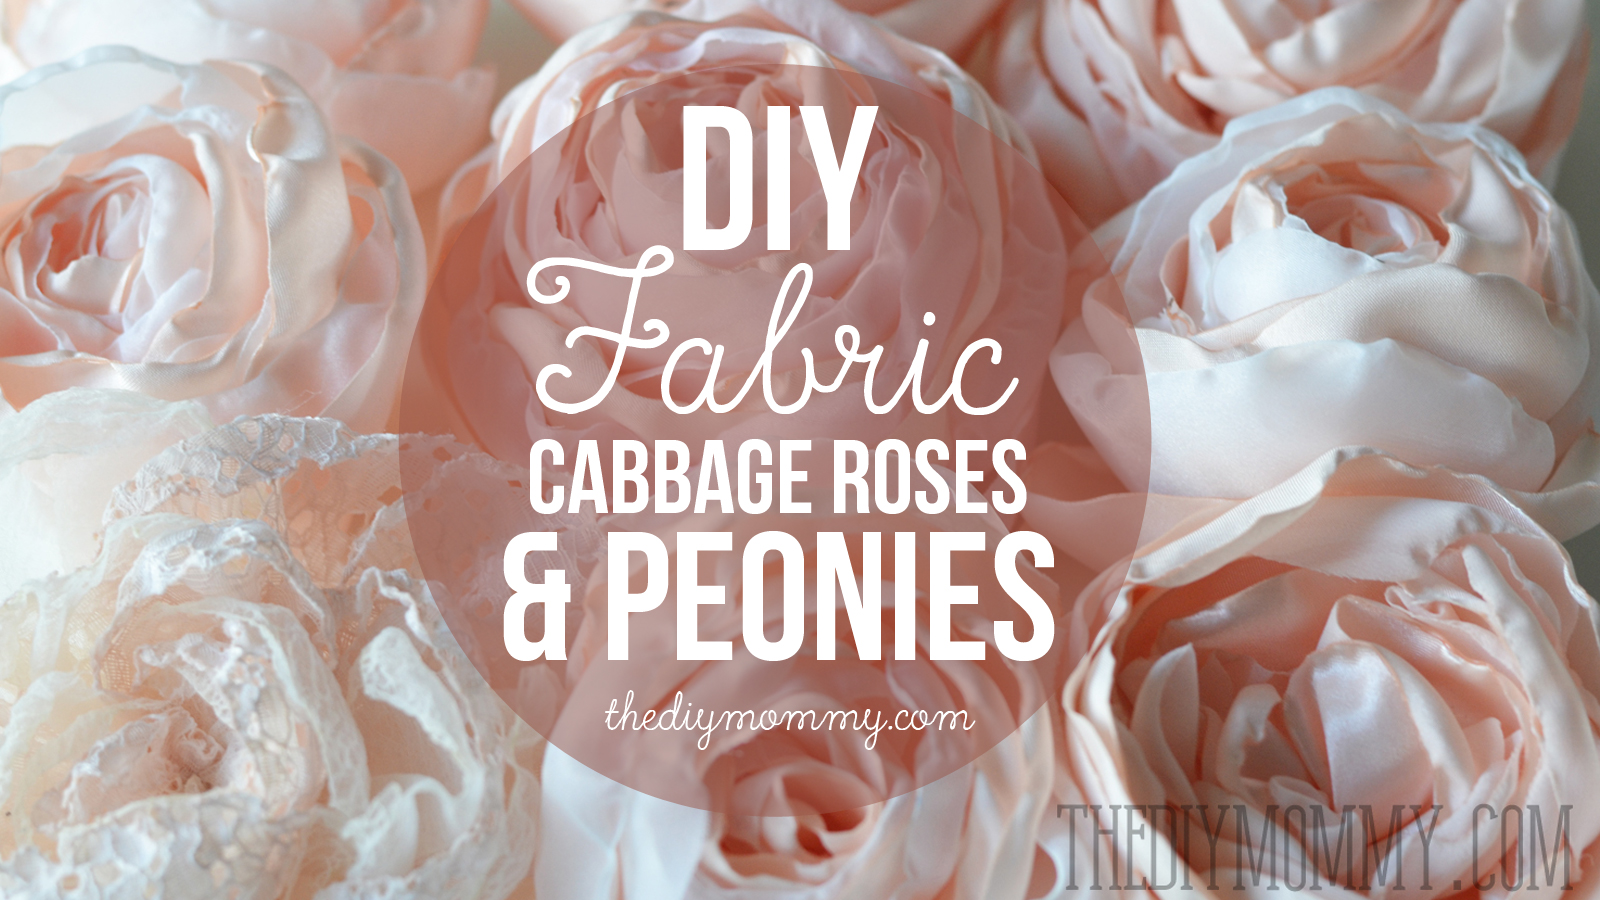 Video Tutorial: Make DIY Fabric Cabbage Roses or Peony Flowers